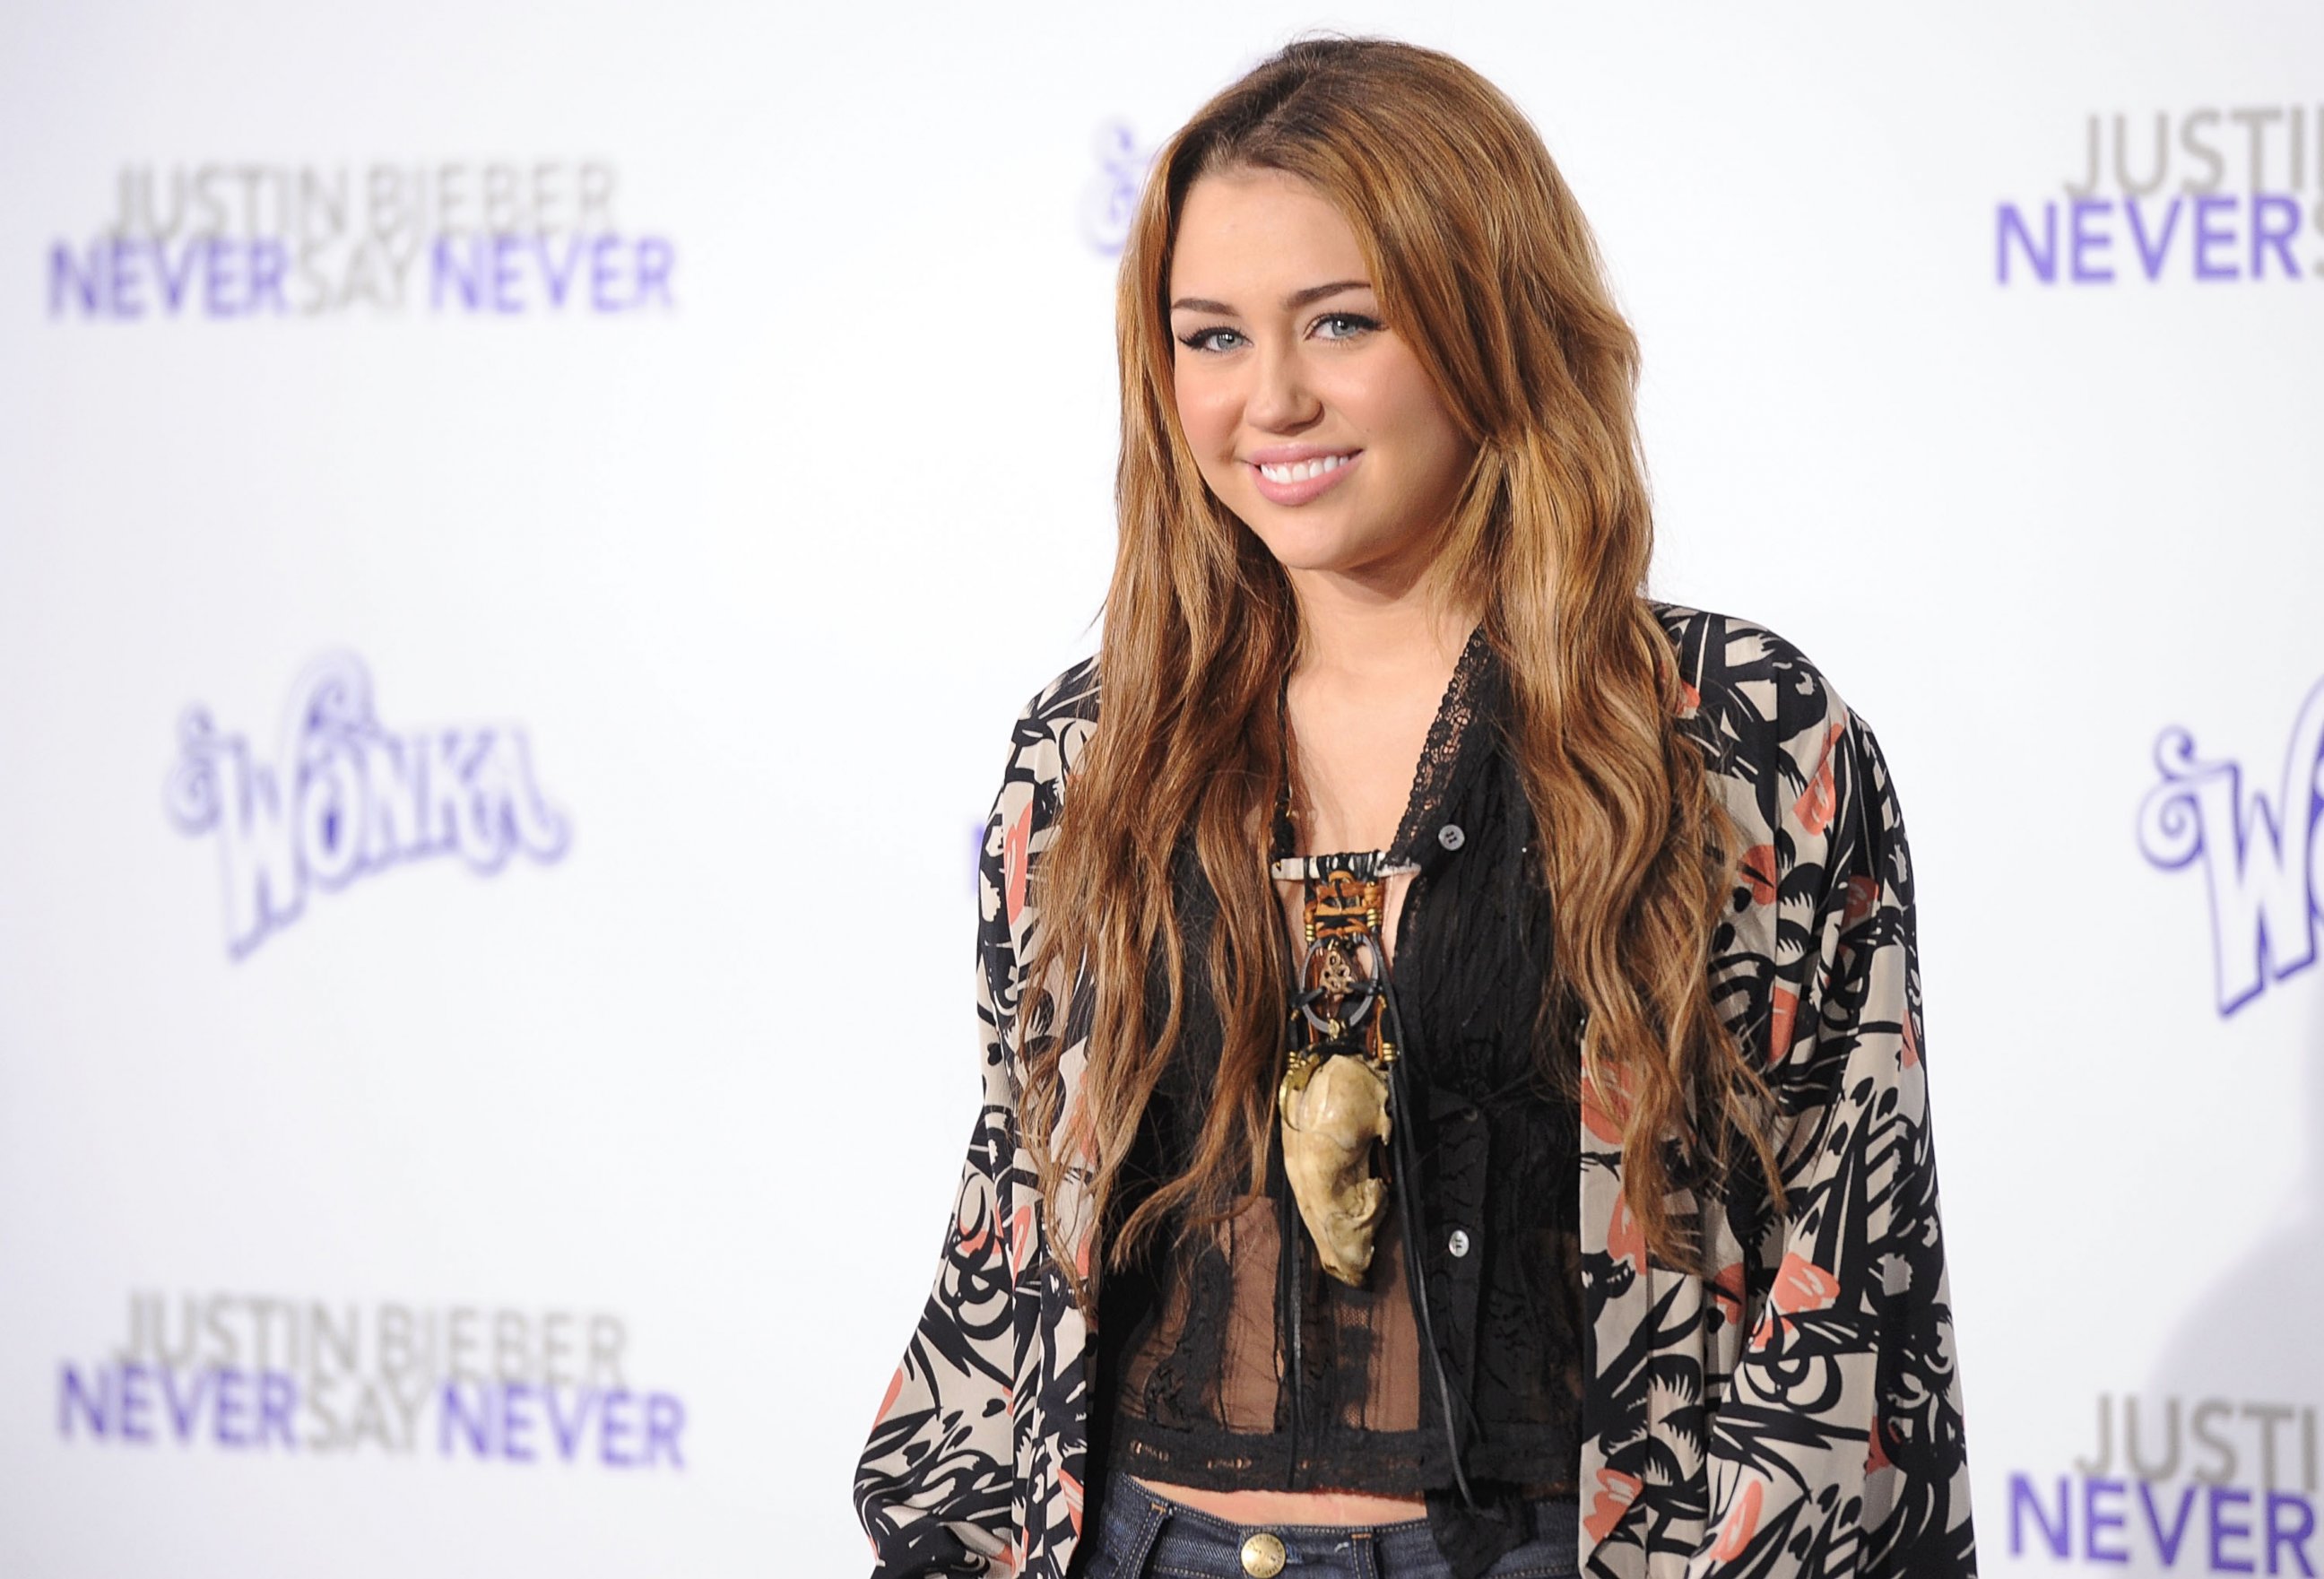 PHOTO: Miley Cyrus arrives at the premiere of "Justin Bieber: Never Say Never" on Feb. 8, 2011 in Los Angeles, Calif.